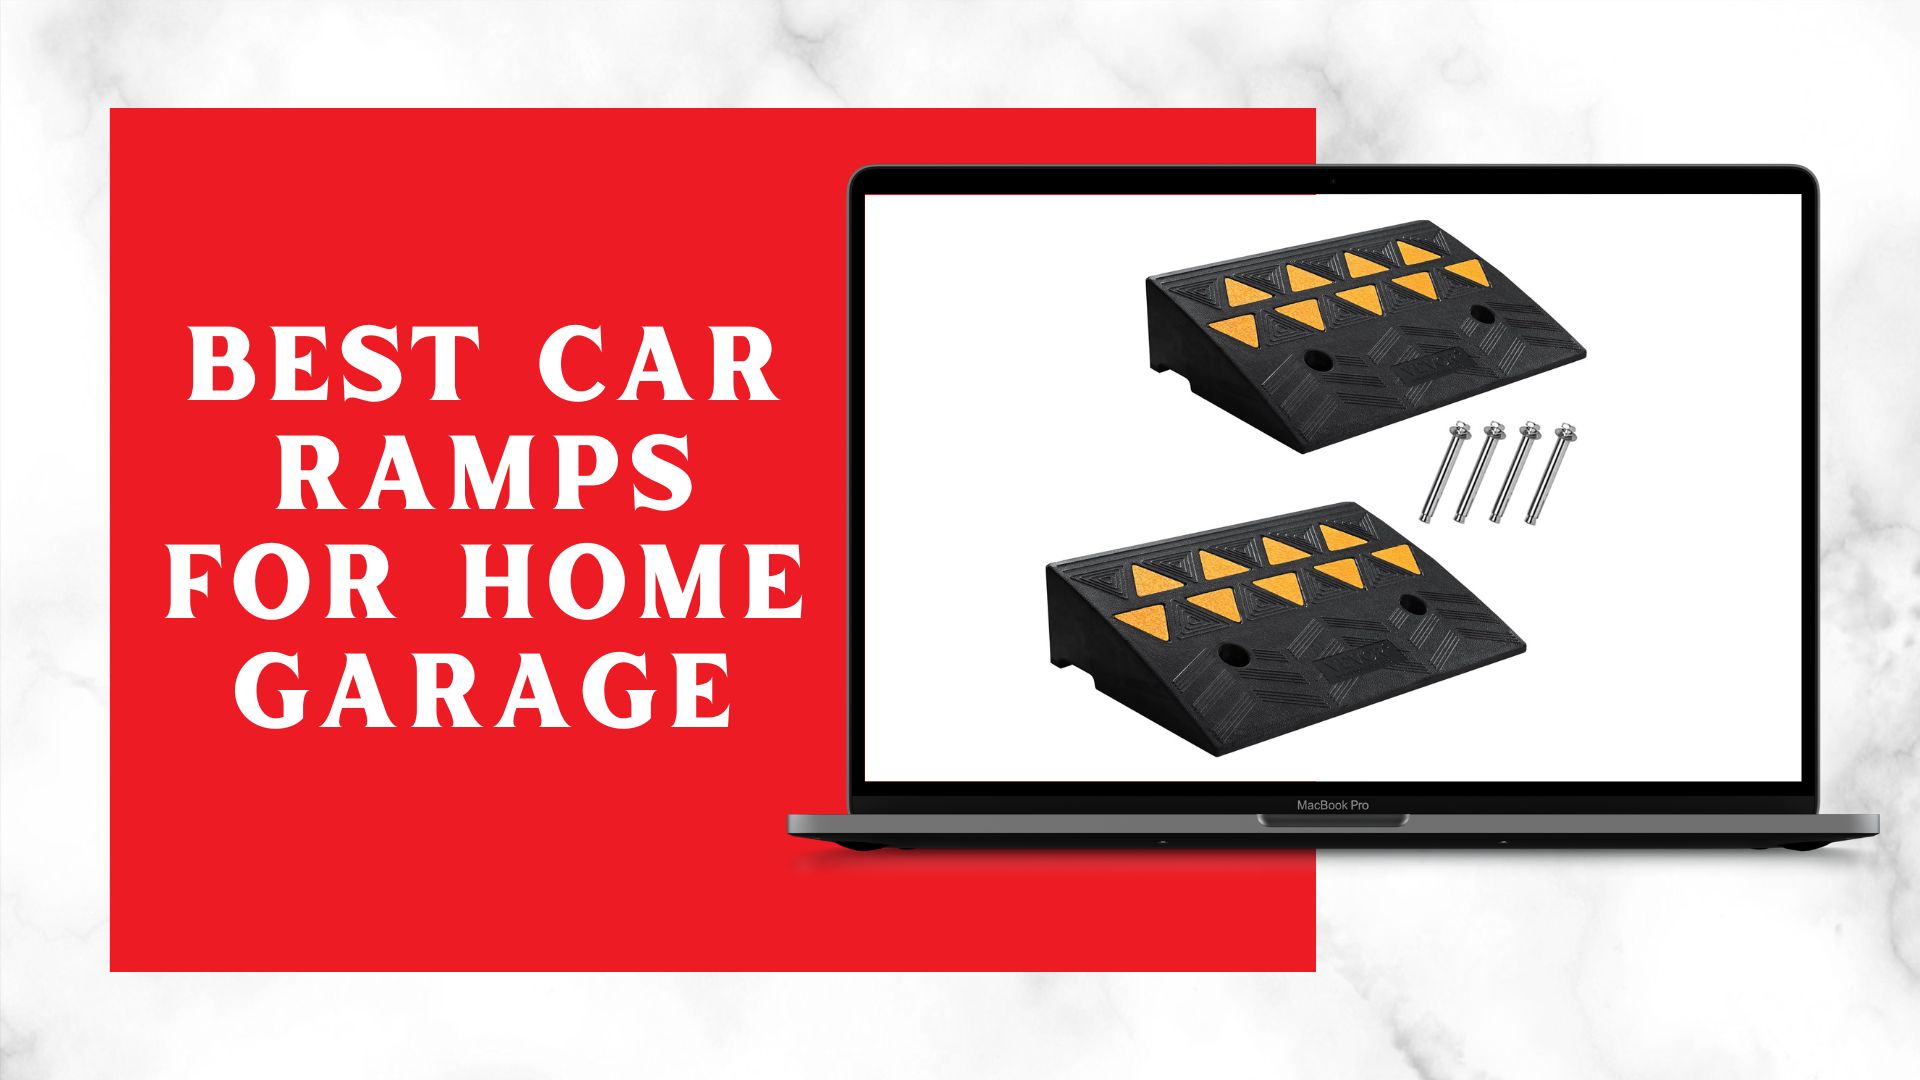 Best Car Ramps For Home Garage